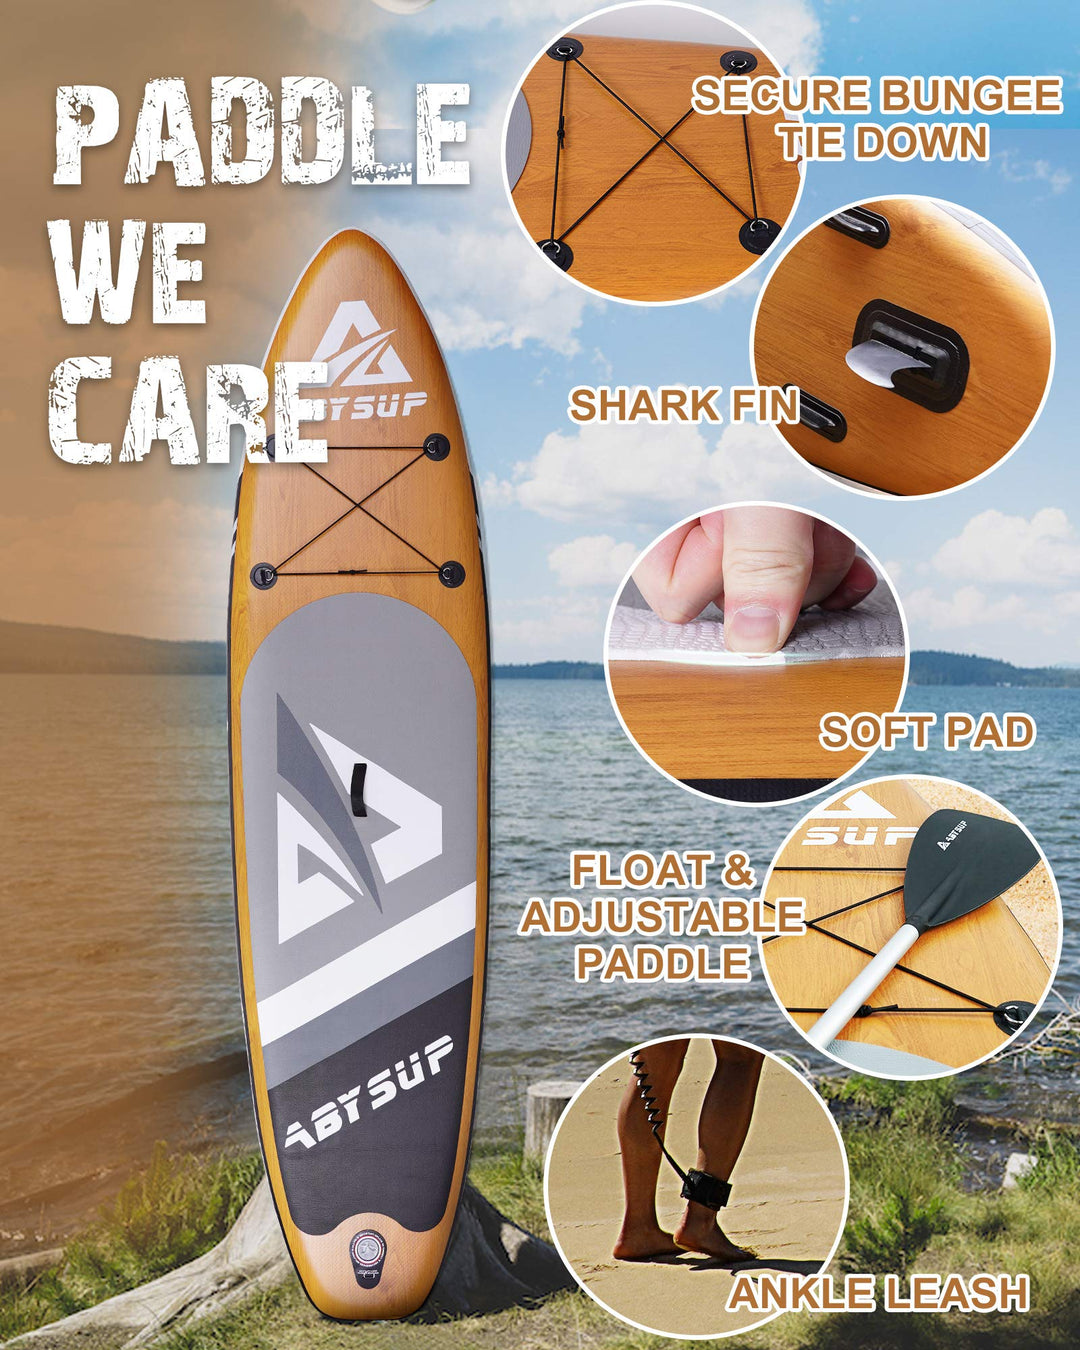  Inflatable Paddle Board With Accessories & Carry Bag